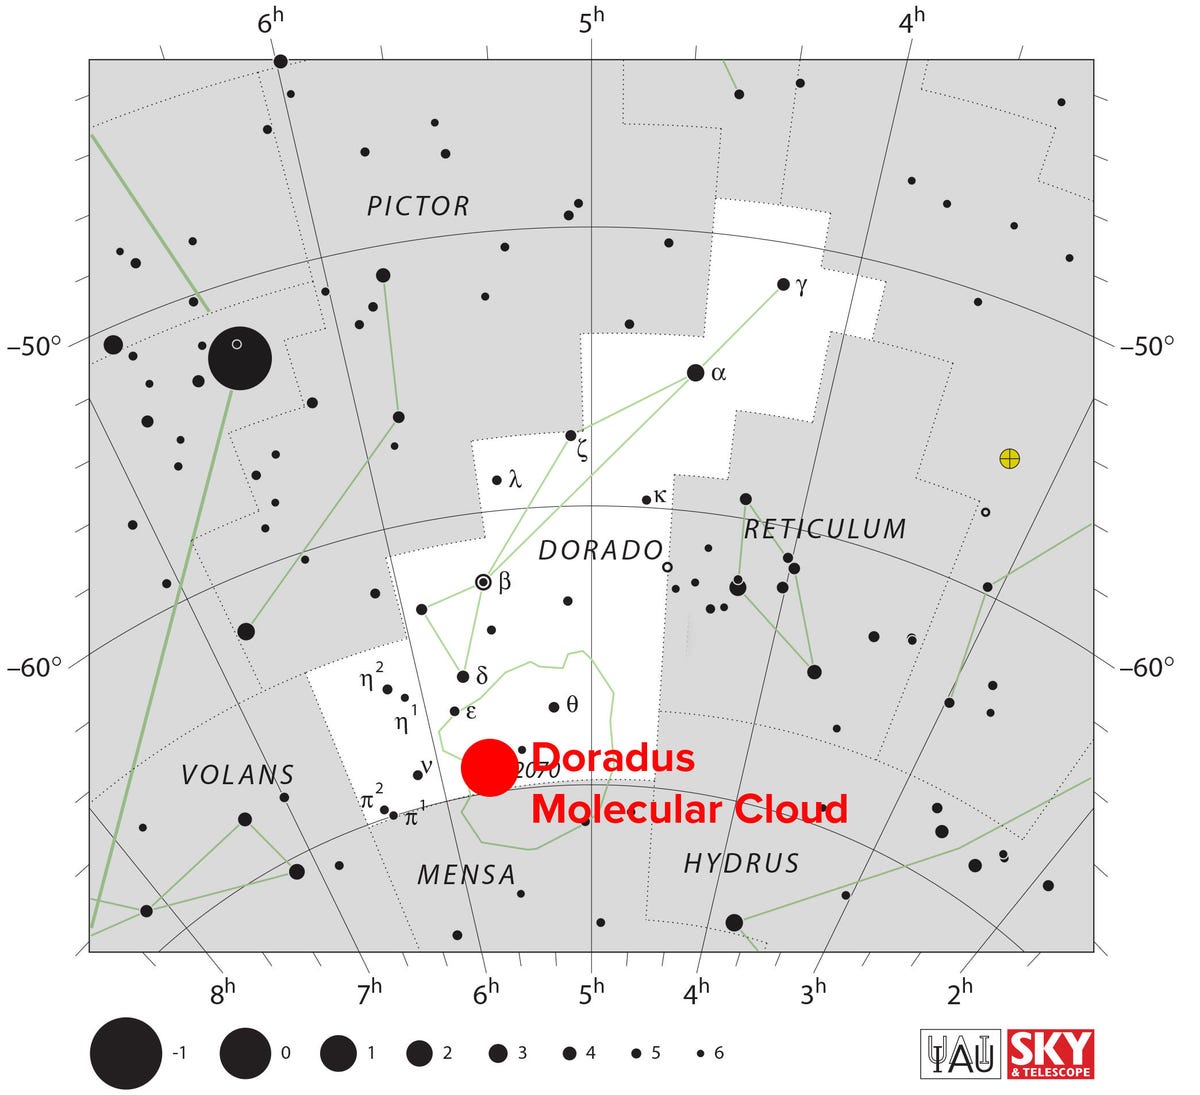 A map of where 30 Doradus is located within the Dorado constellation